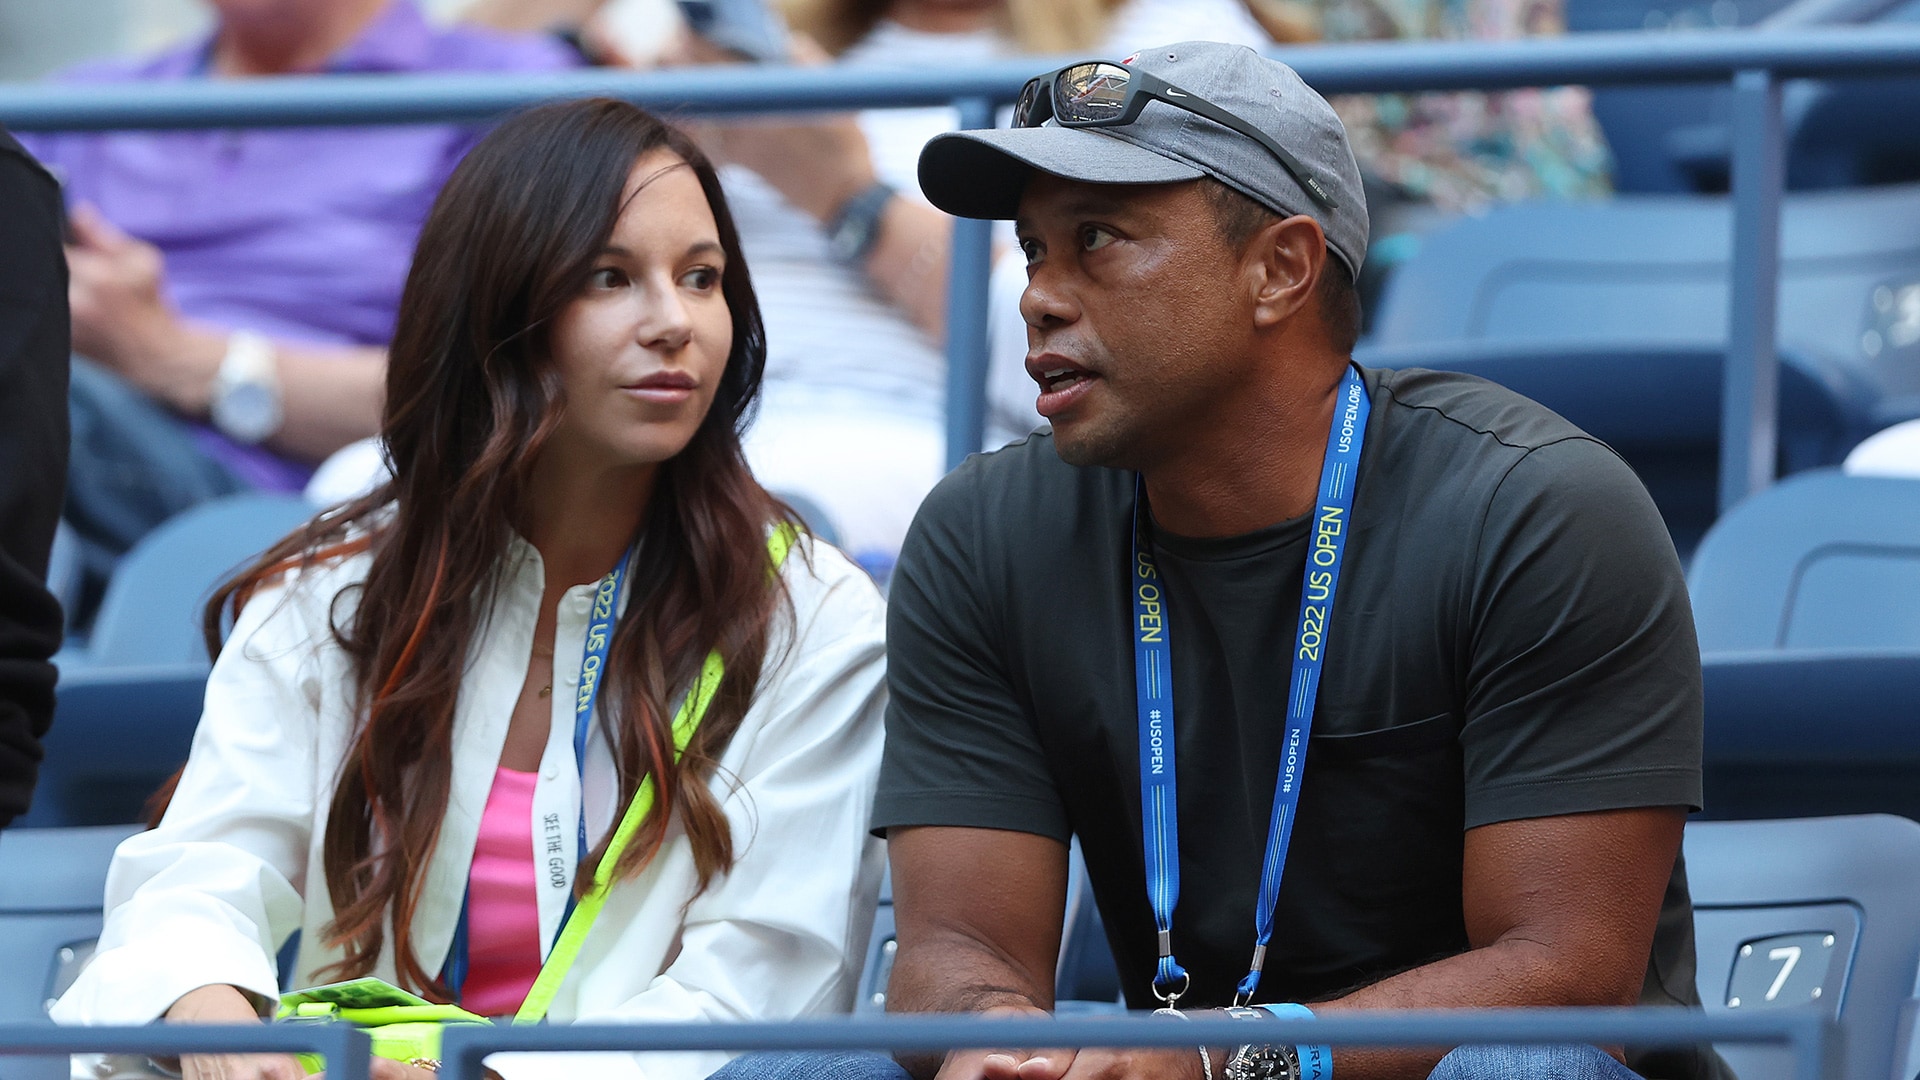 Tiger Woods’ ex-girlfriend files legal complaint in effort to nullify NDA